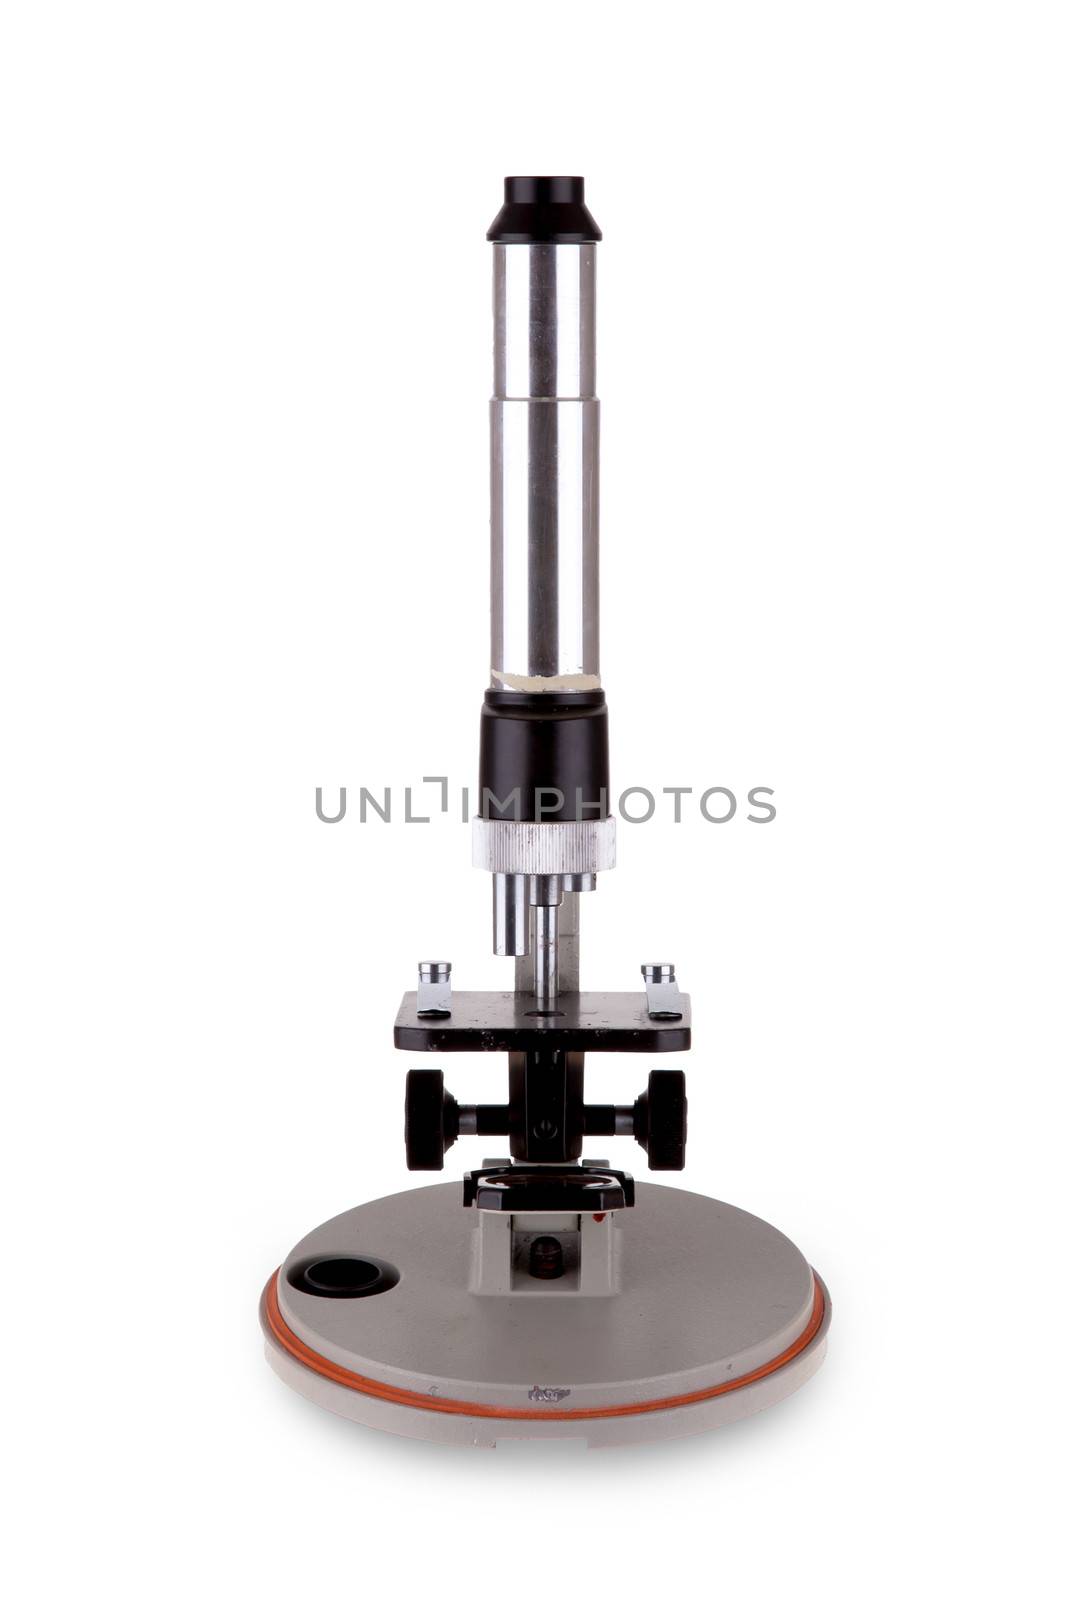 Old microscope isolated on a white background